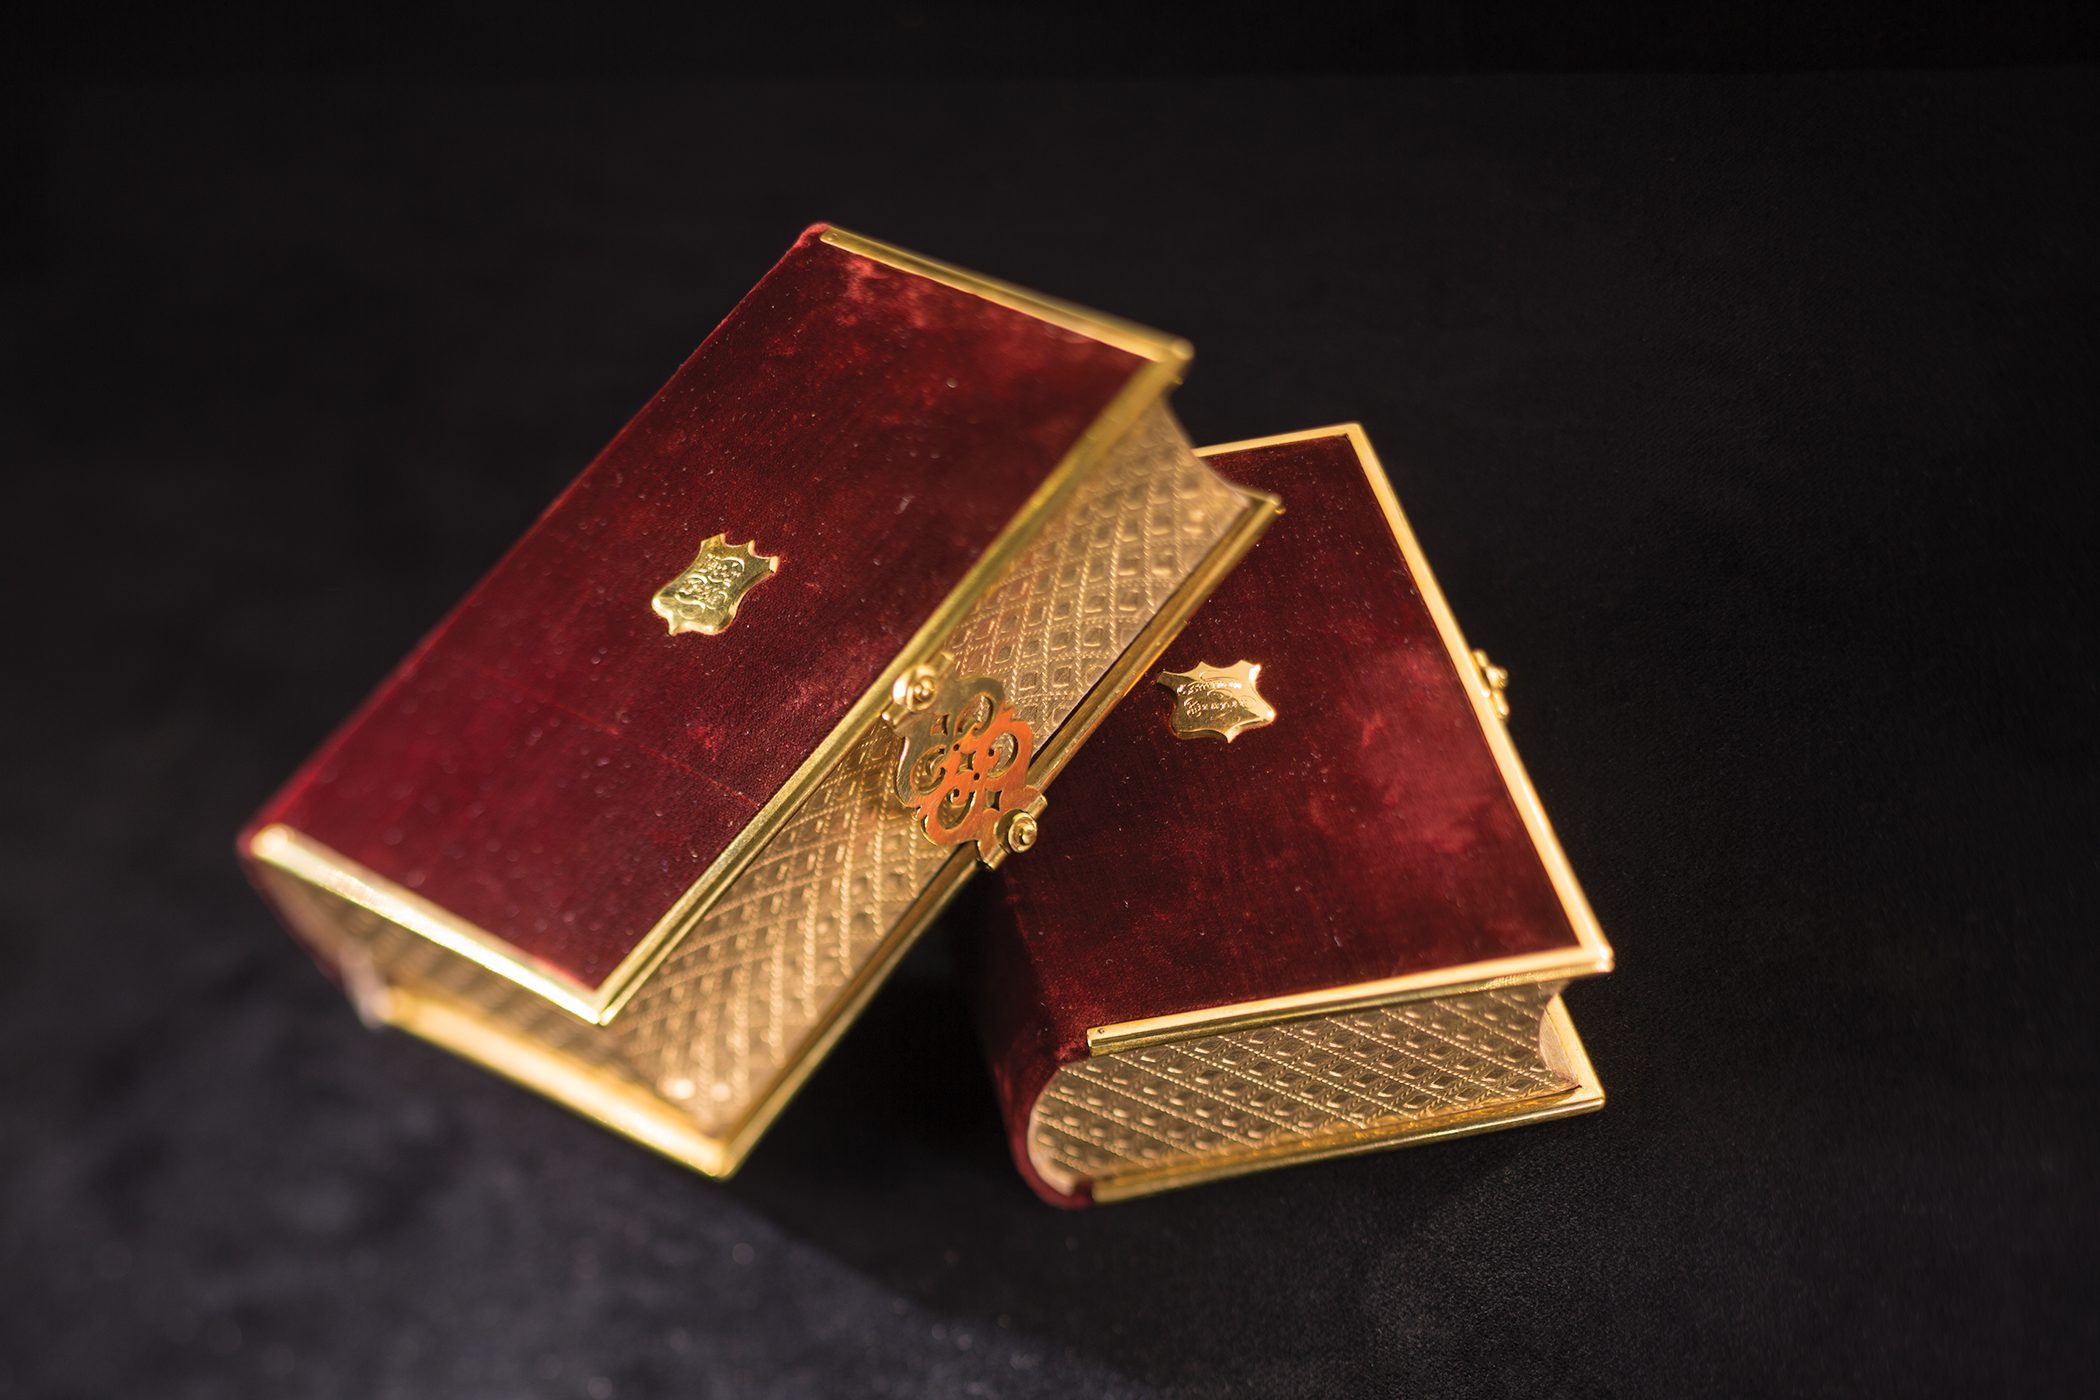 Oxford-printed 1845 Bible and Book of Common Prayer